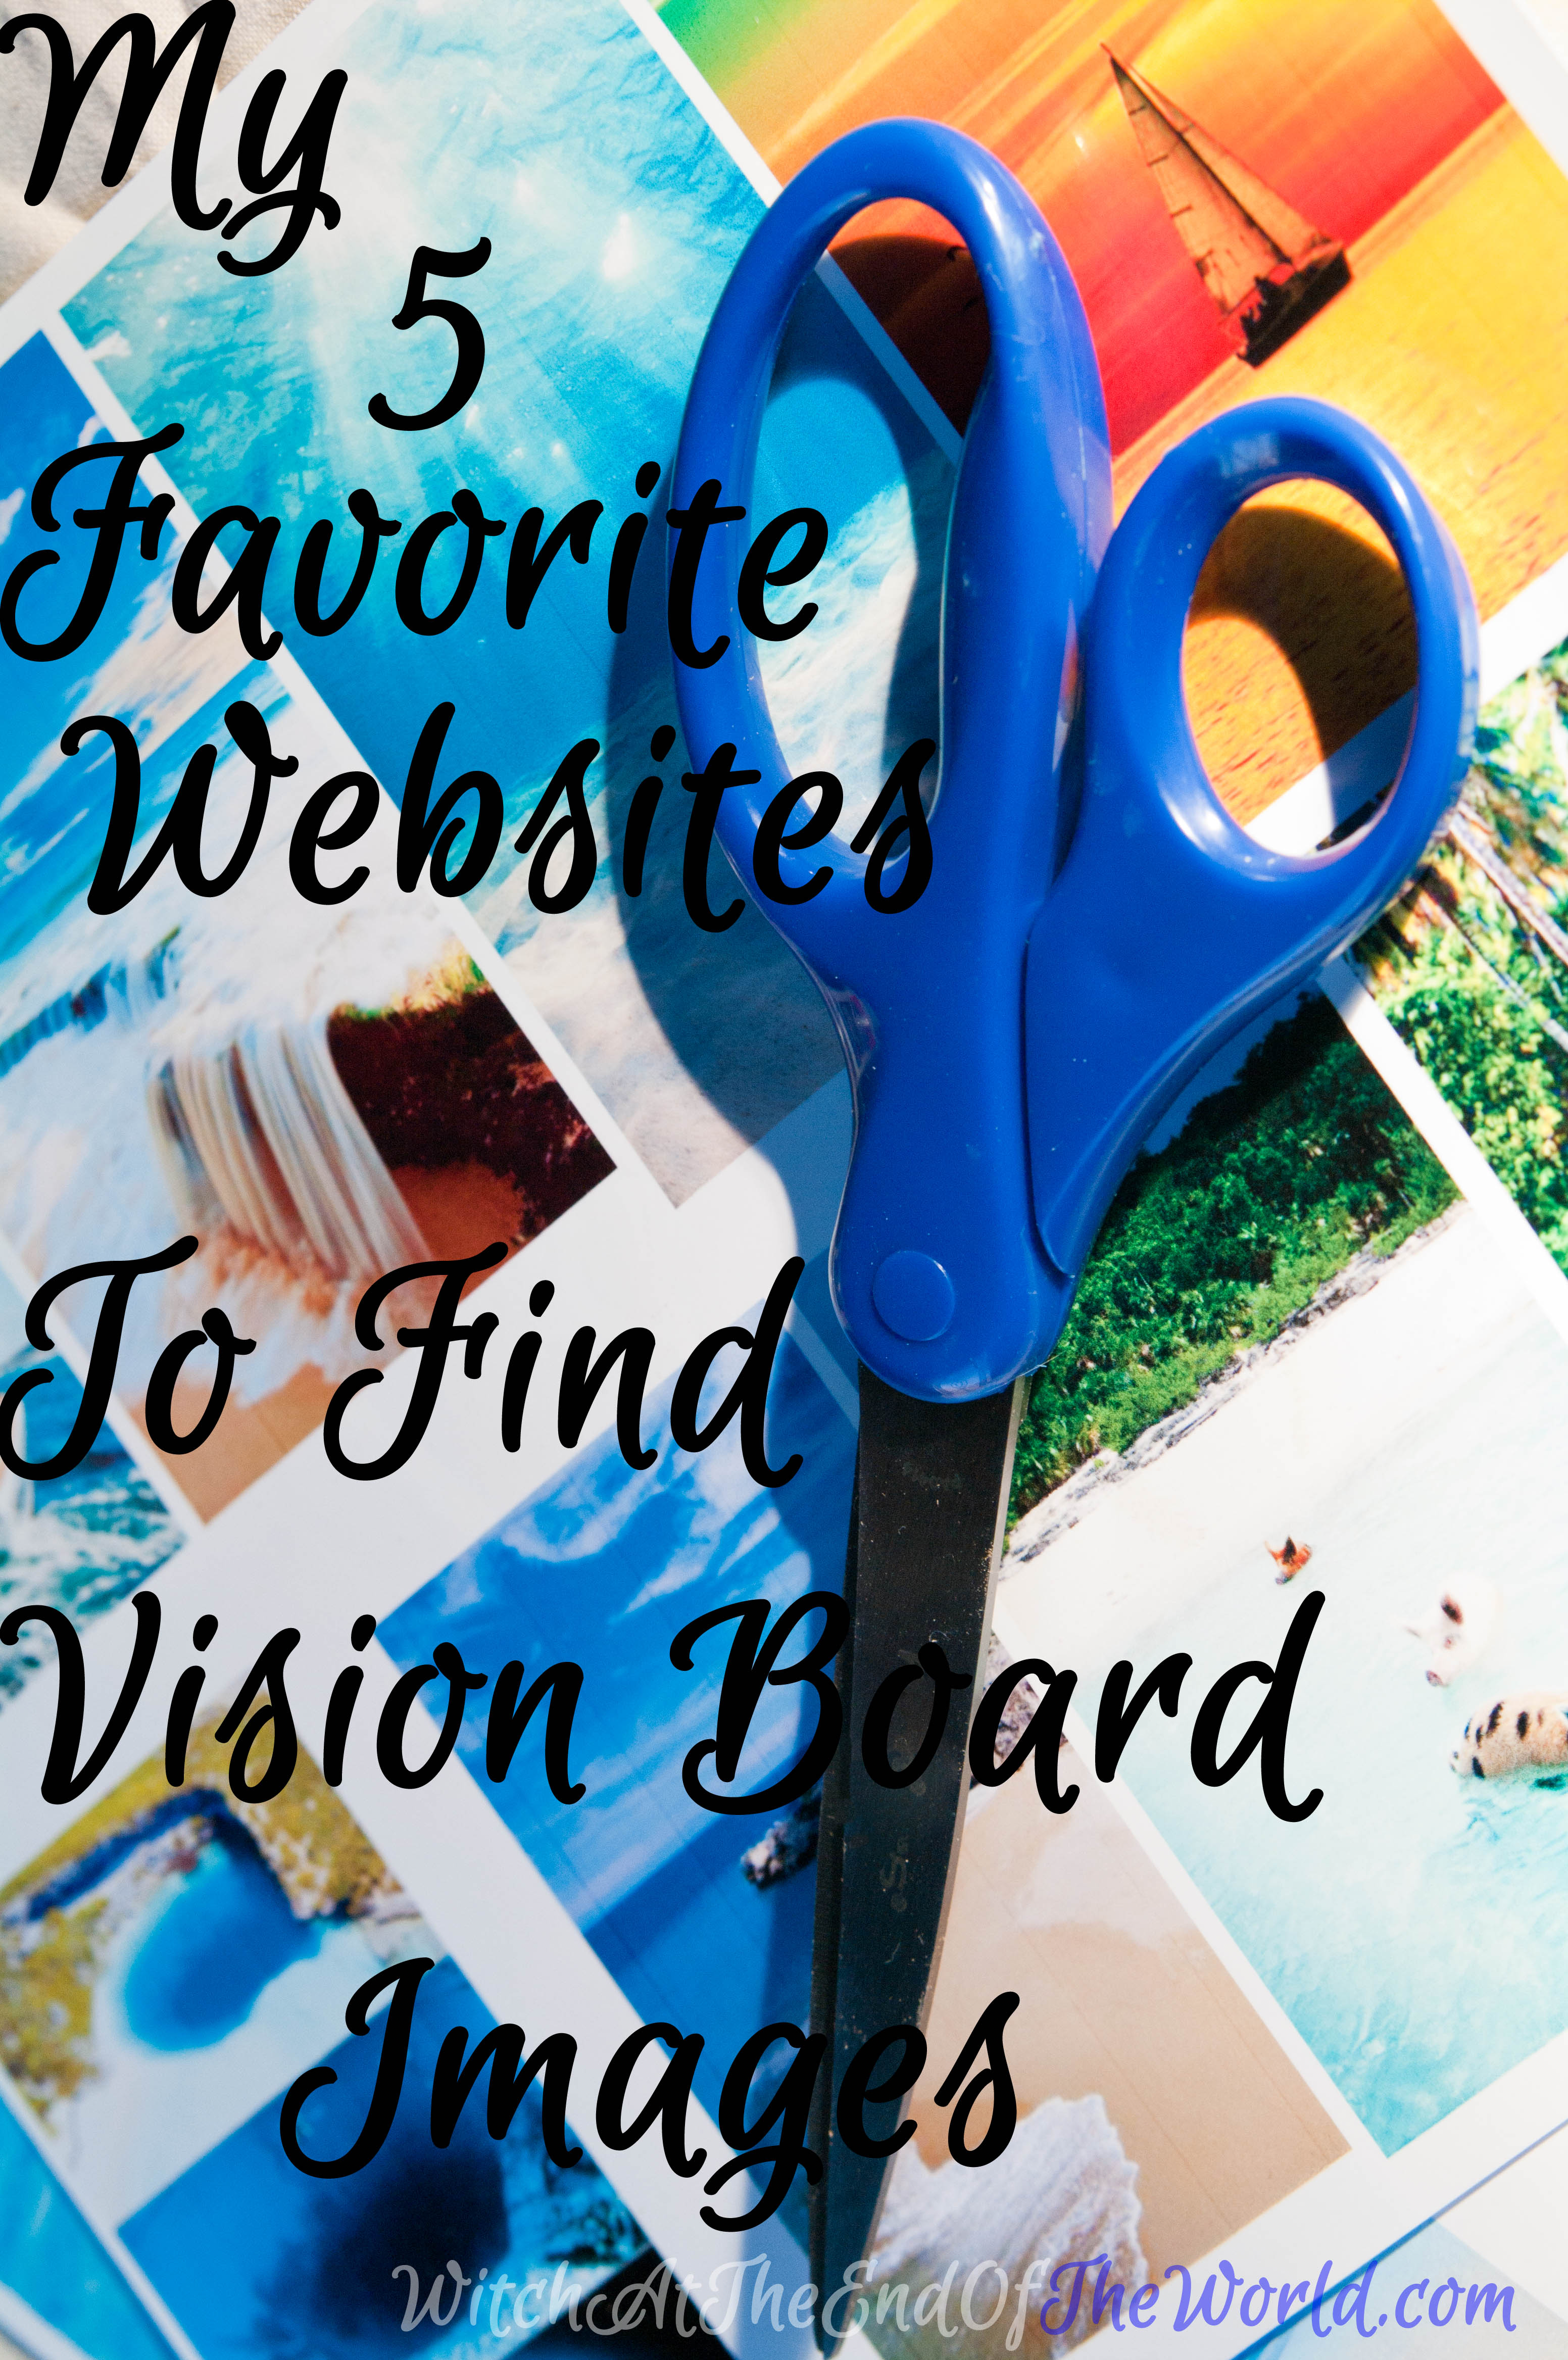 5 Great Places to Find Vision Board Images